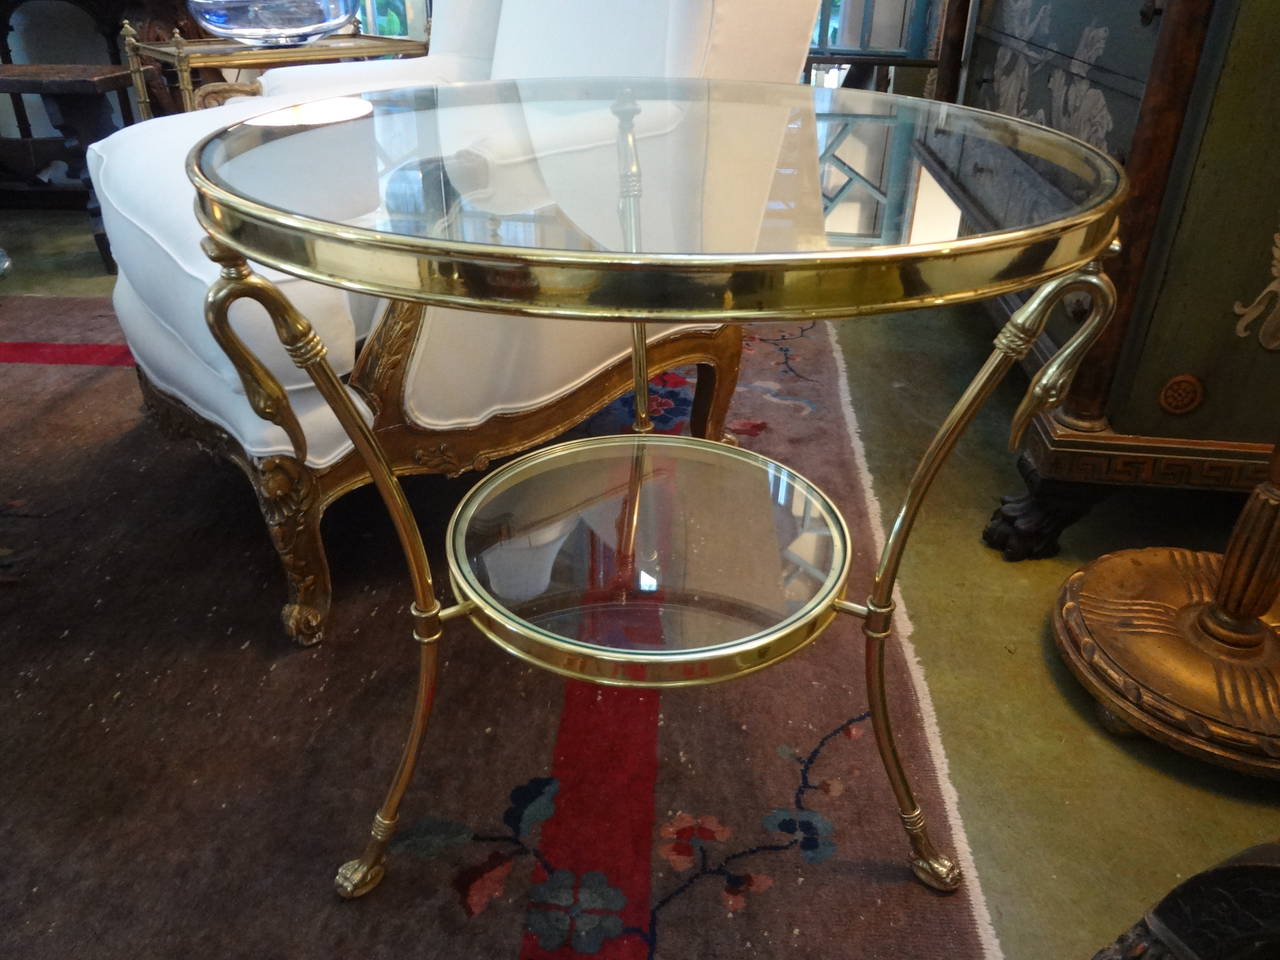 Versatile Italian Hollywood Regency or Mid-Century Modern brass and glass table, side table, drink table, cigarette table or guéridon with swans. This Maison Jansen inspired table is the perfect side table!
 